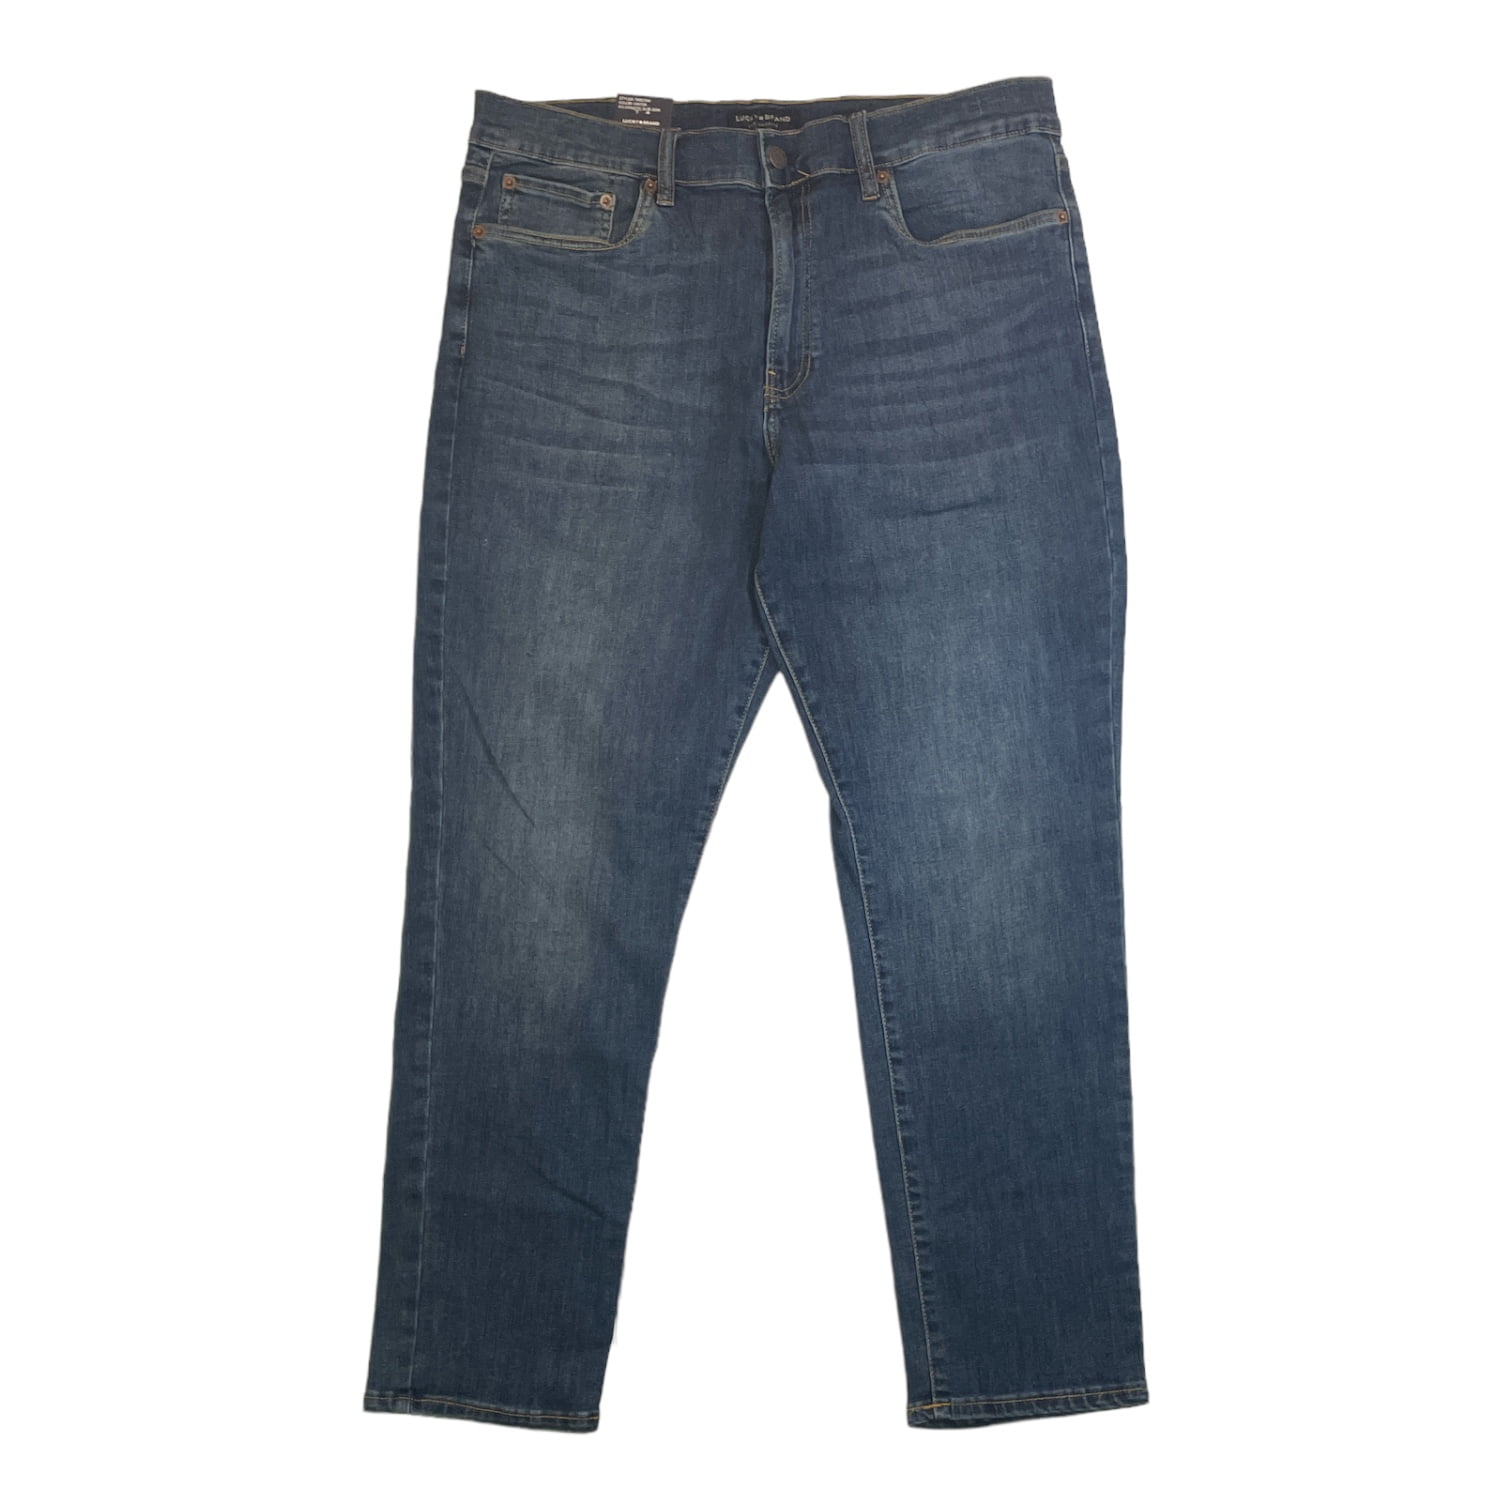 Lucky Brand Solid Blue Jeans Size 4 - 70% off